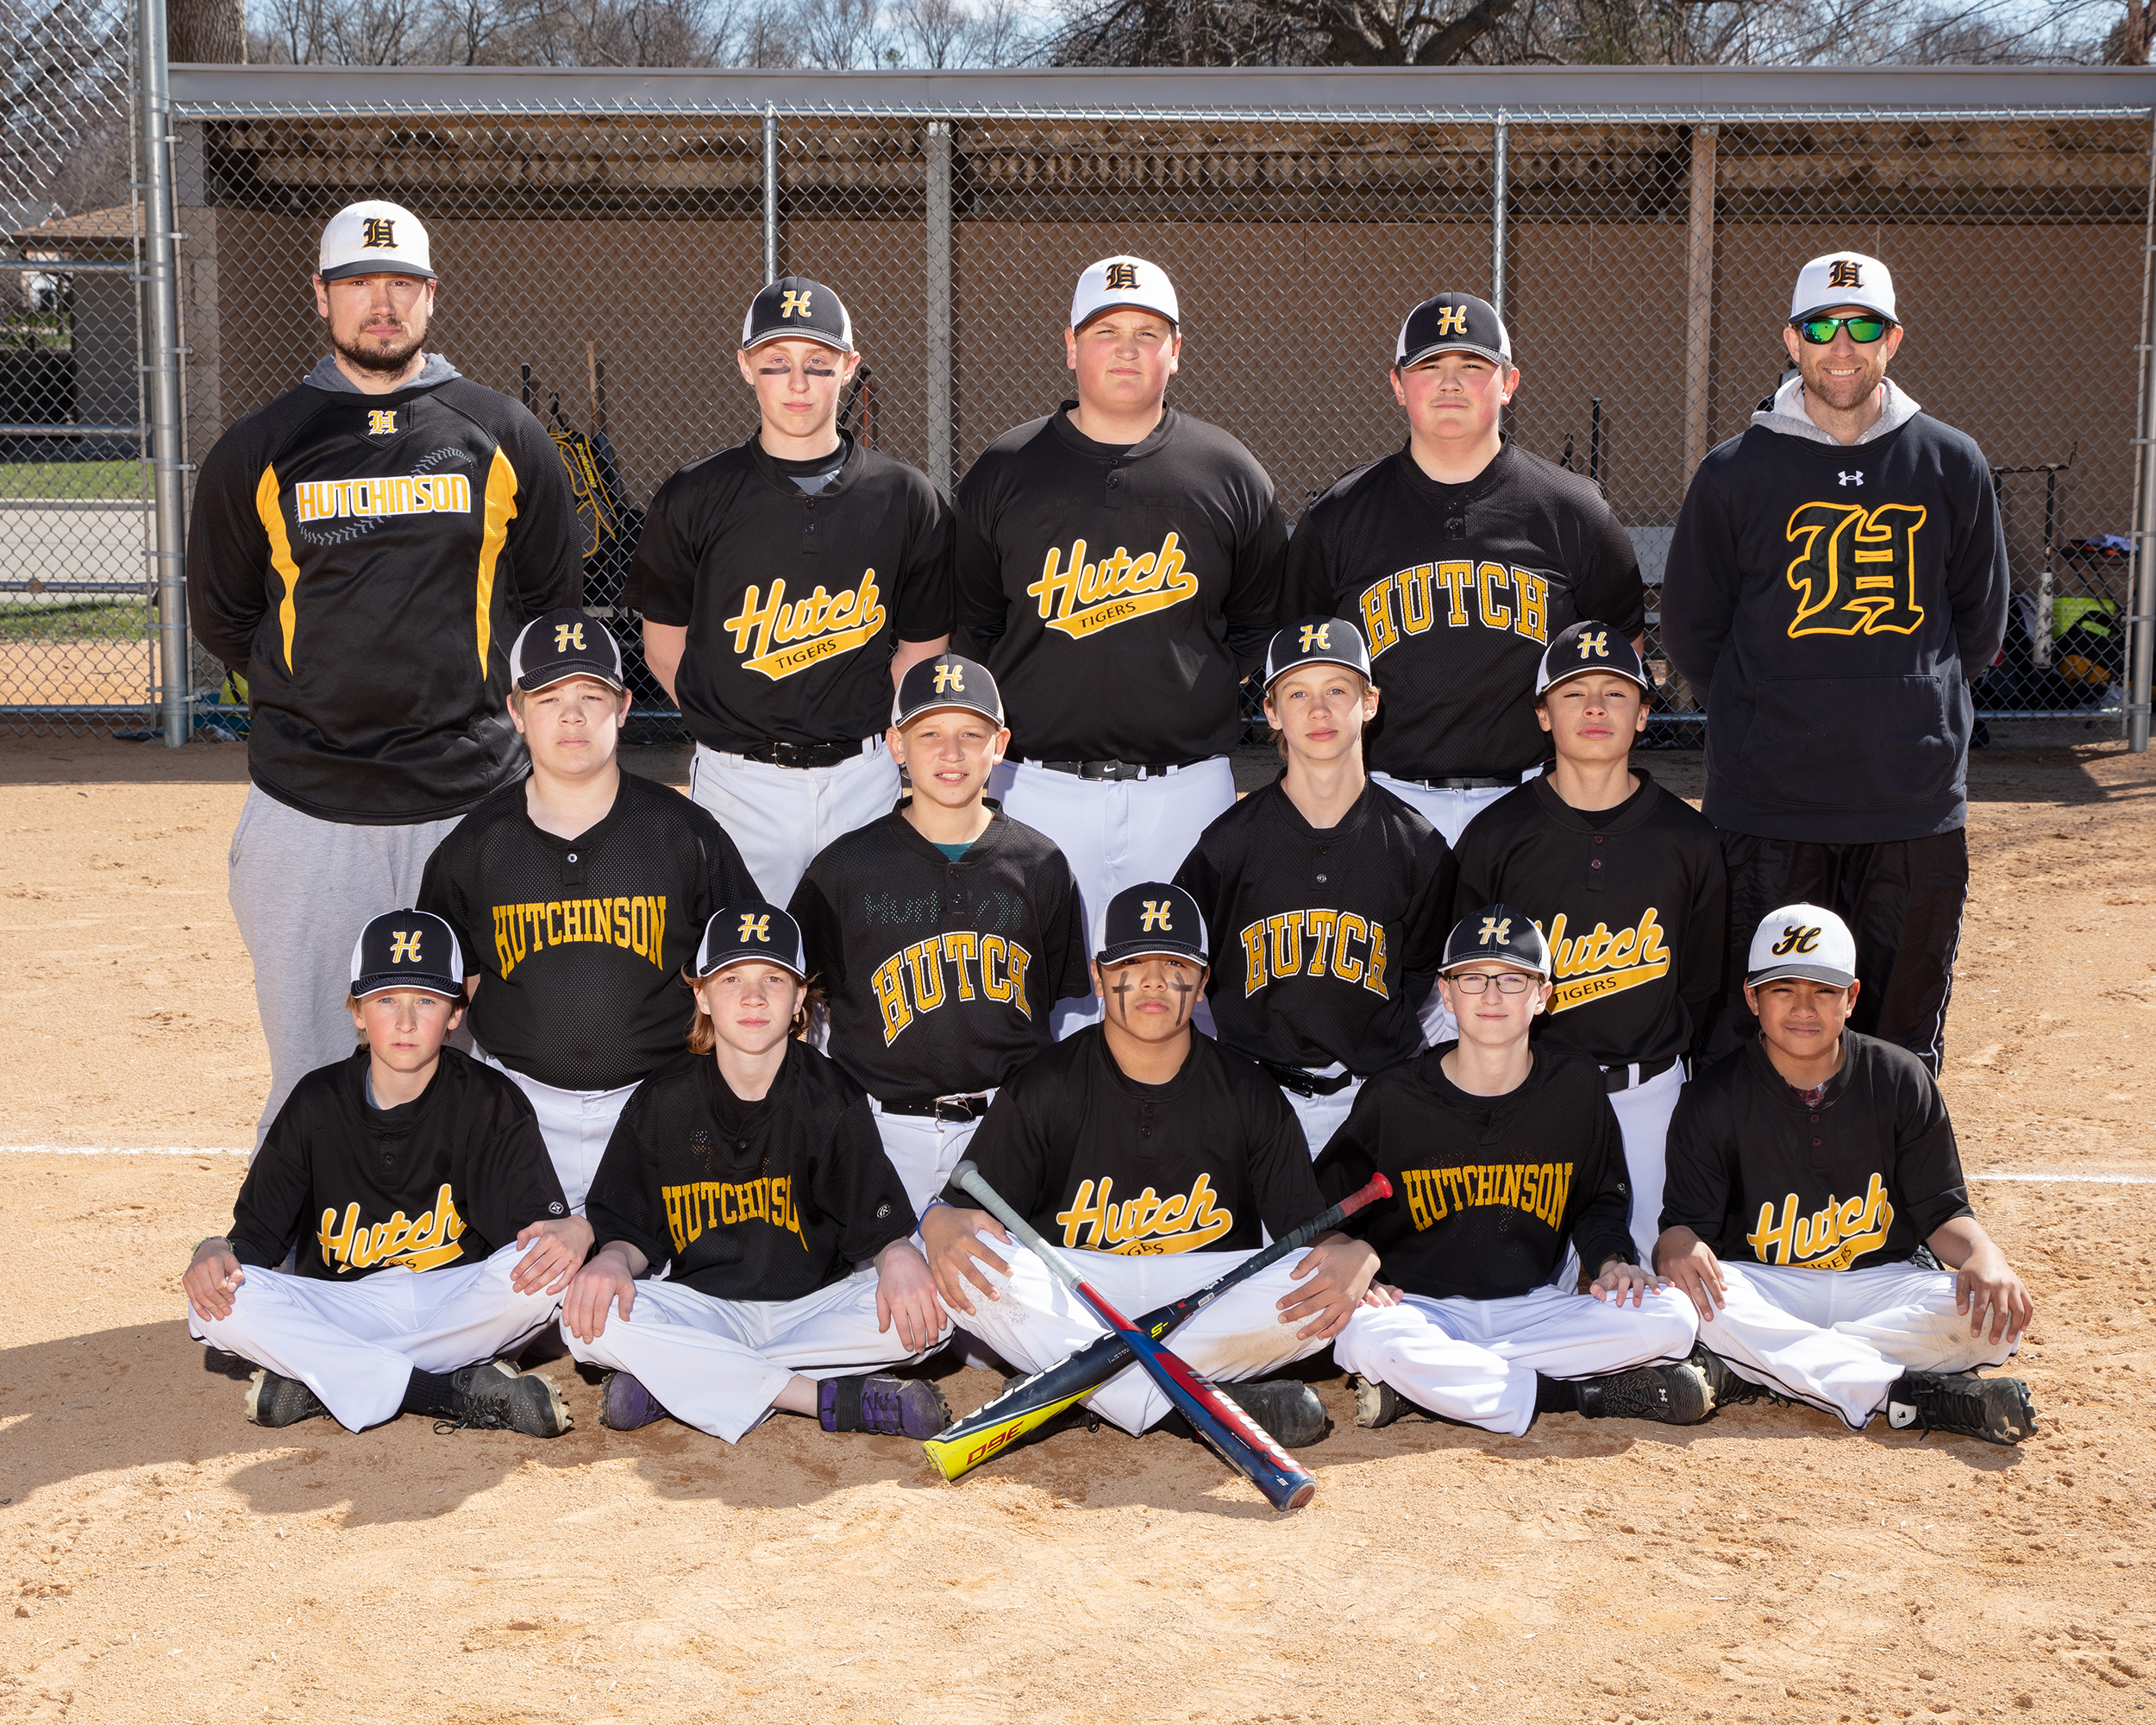 group photo of middle school baseball team